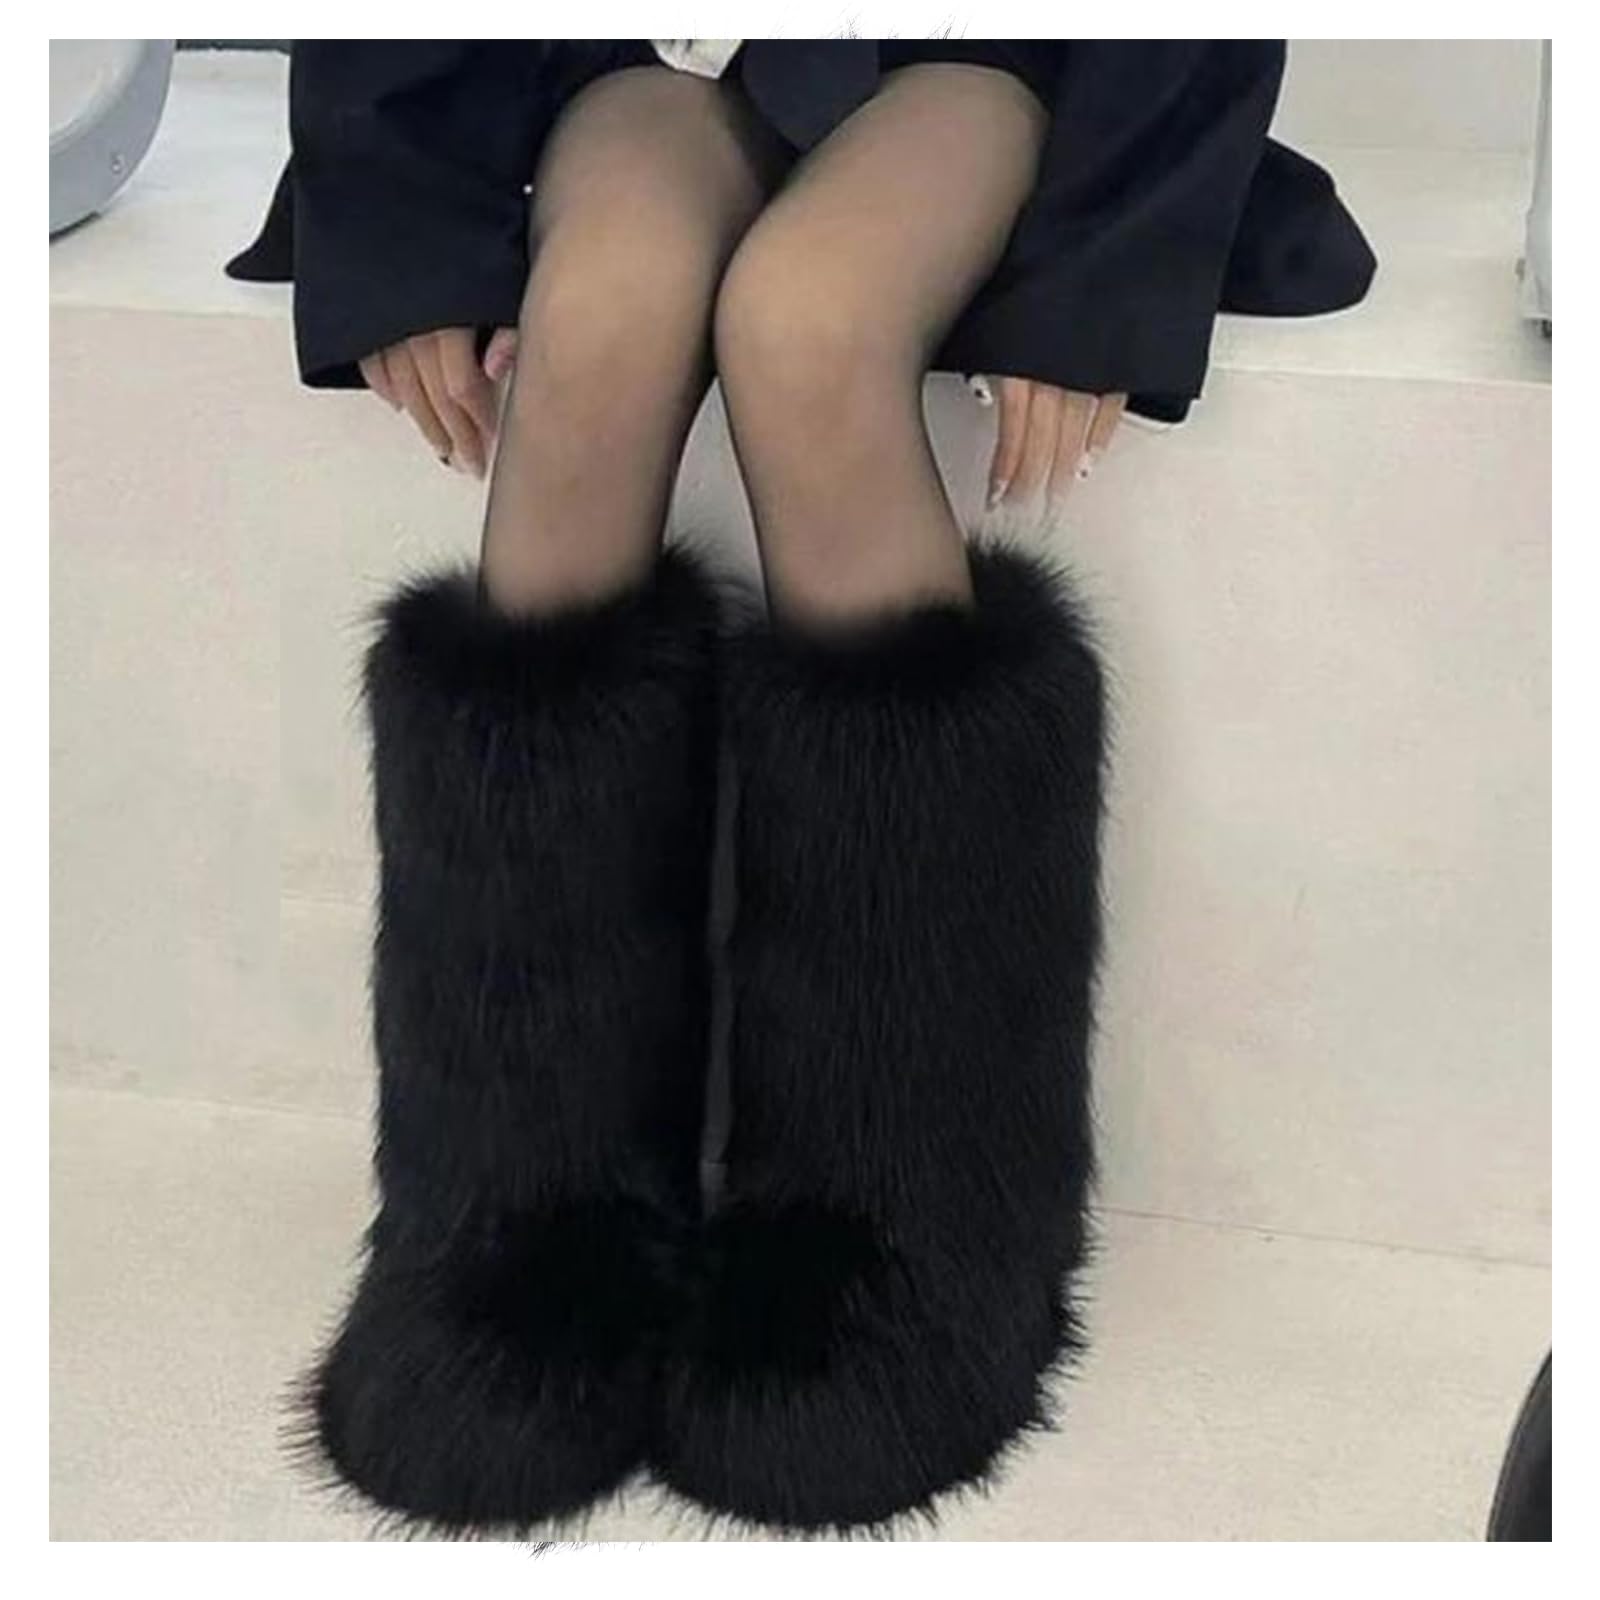 IXU Women's Faux Fur Boot Furry Fluffy Round Toe Suede Winter Comfy Plush Warm Short Outdoor Indoor Flat Shoes Knee-High Boots